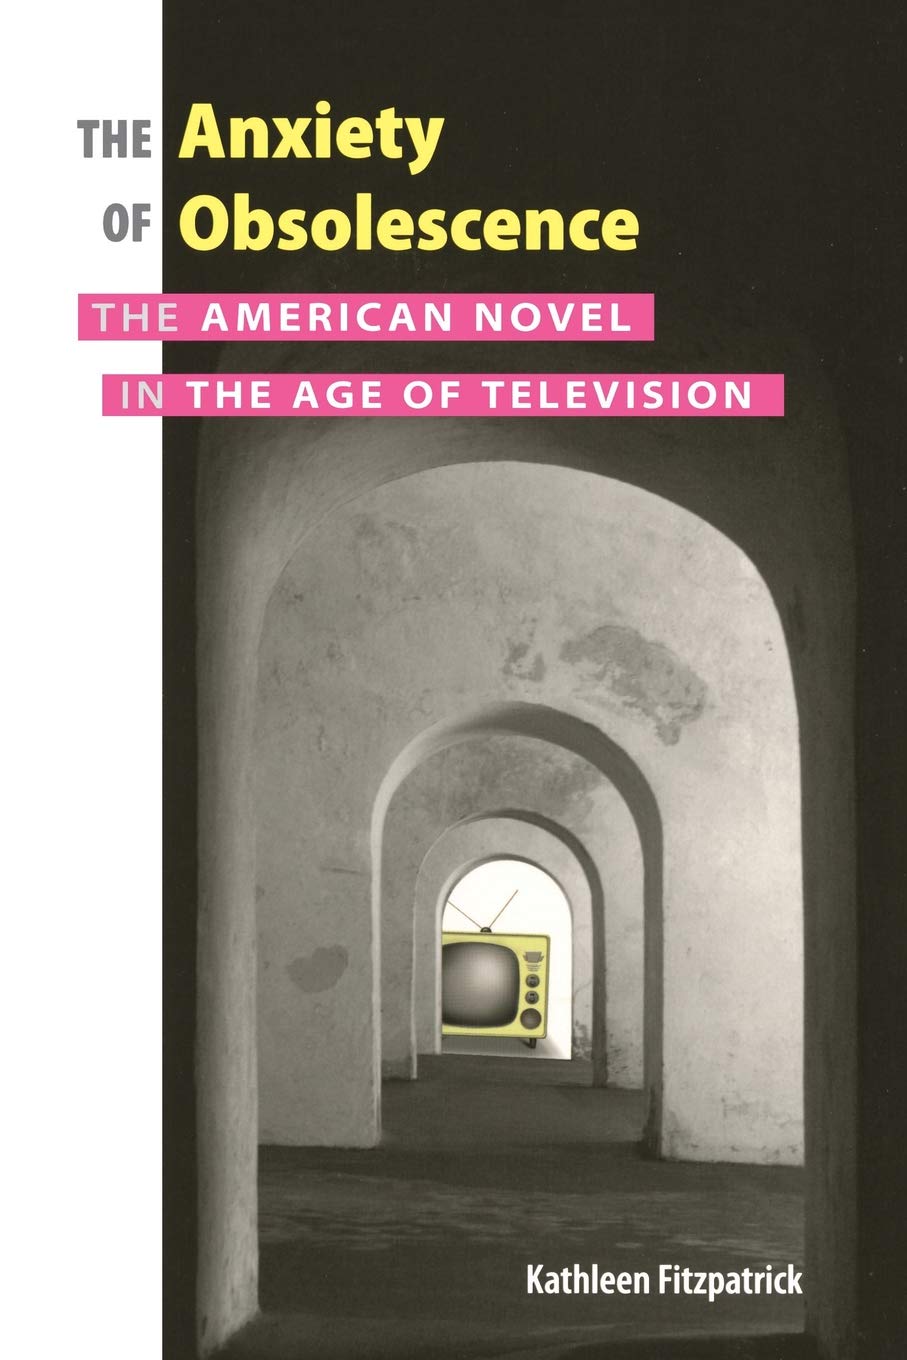 The Anxiety of Obsolescence: The American Novel in the Age of Television